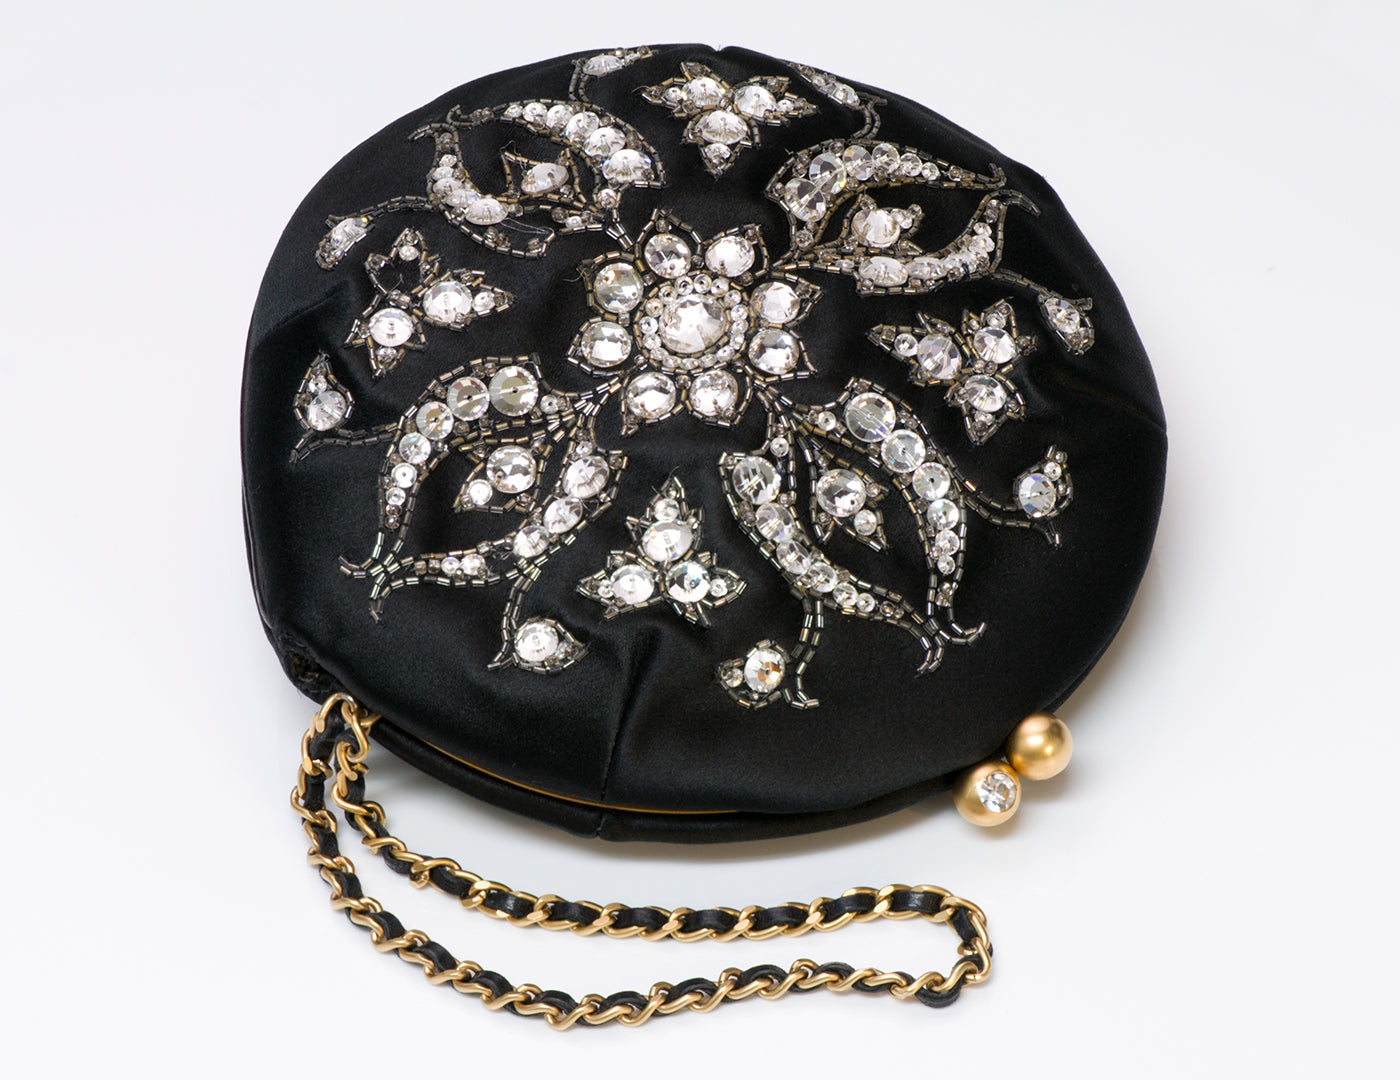 chanel-satin-beaded-crystal-round-clutch-bag